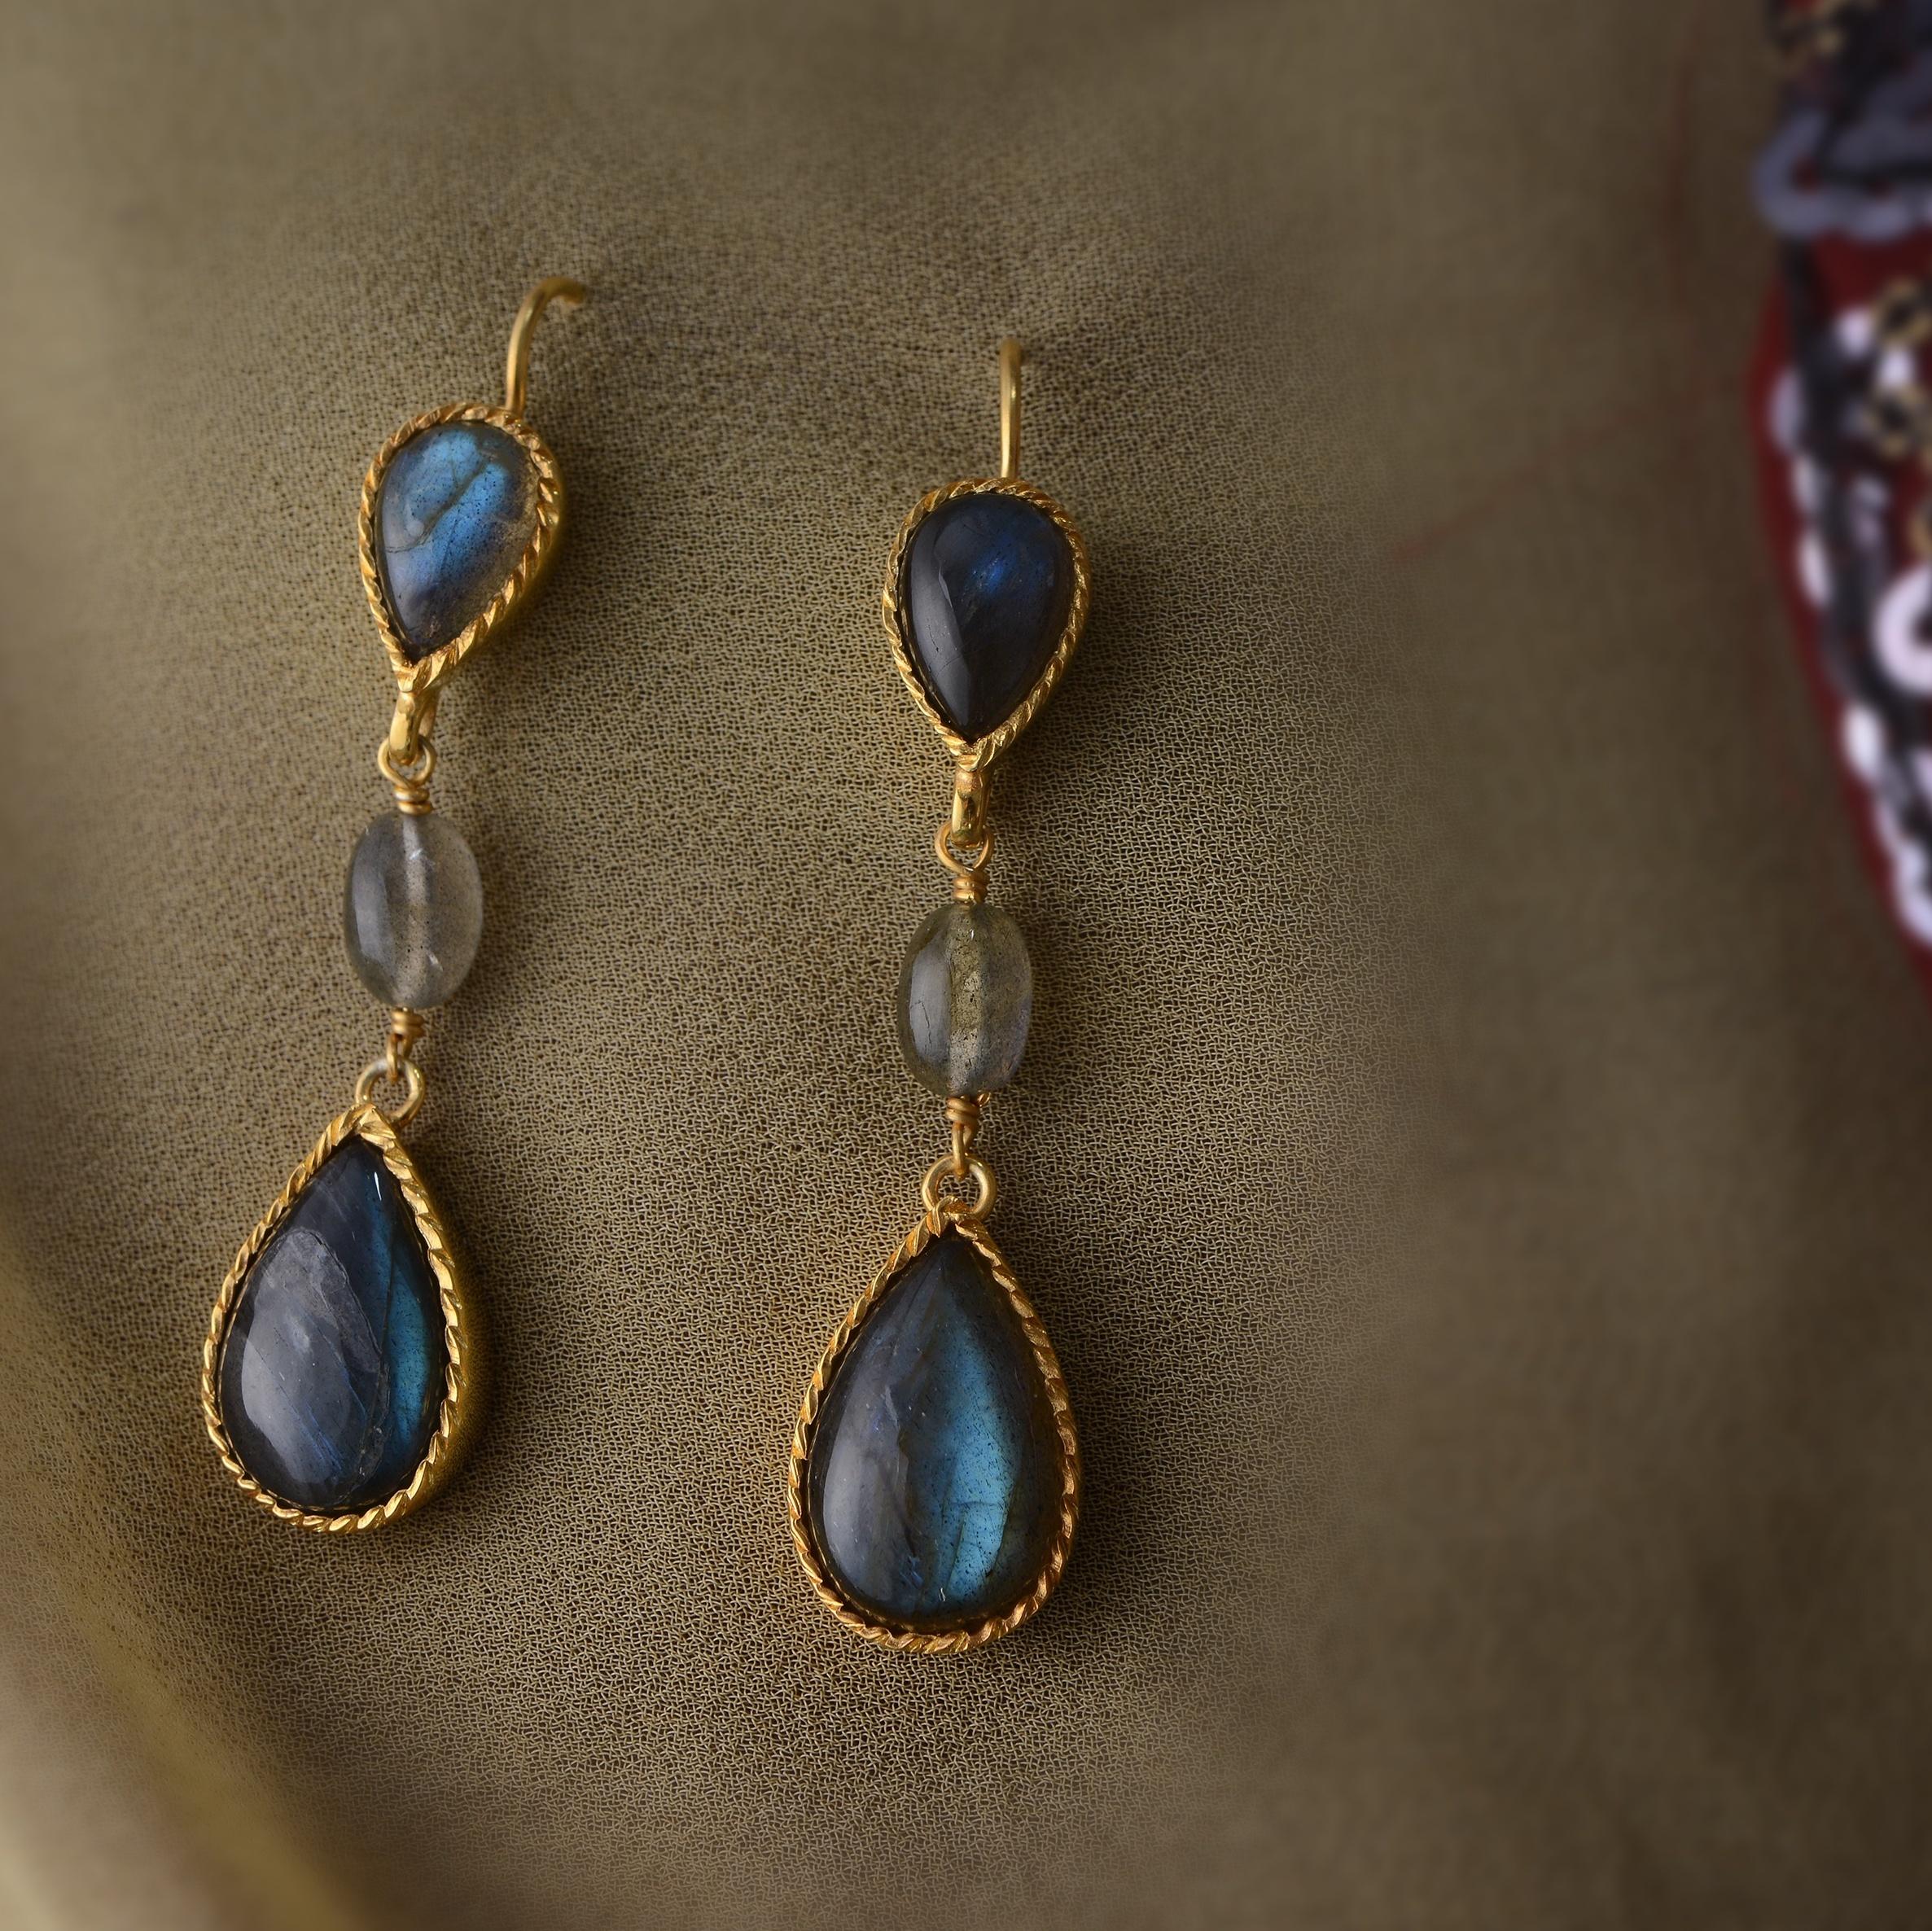 These lovely labradorite teardrop earrings have been handmade in our workshops.
Using cabochon gemstones cut especially for the earrings, they are from a limited edition and have a matching pendant and ring.
52 mm from top of earring hook x 10mm
The